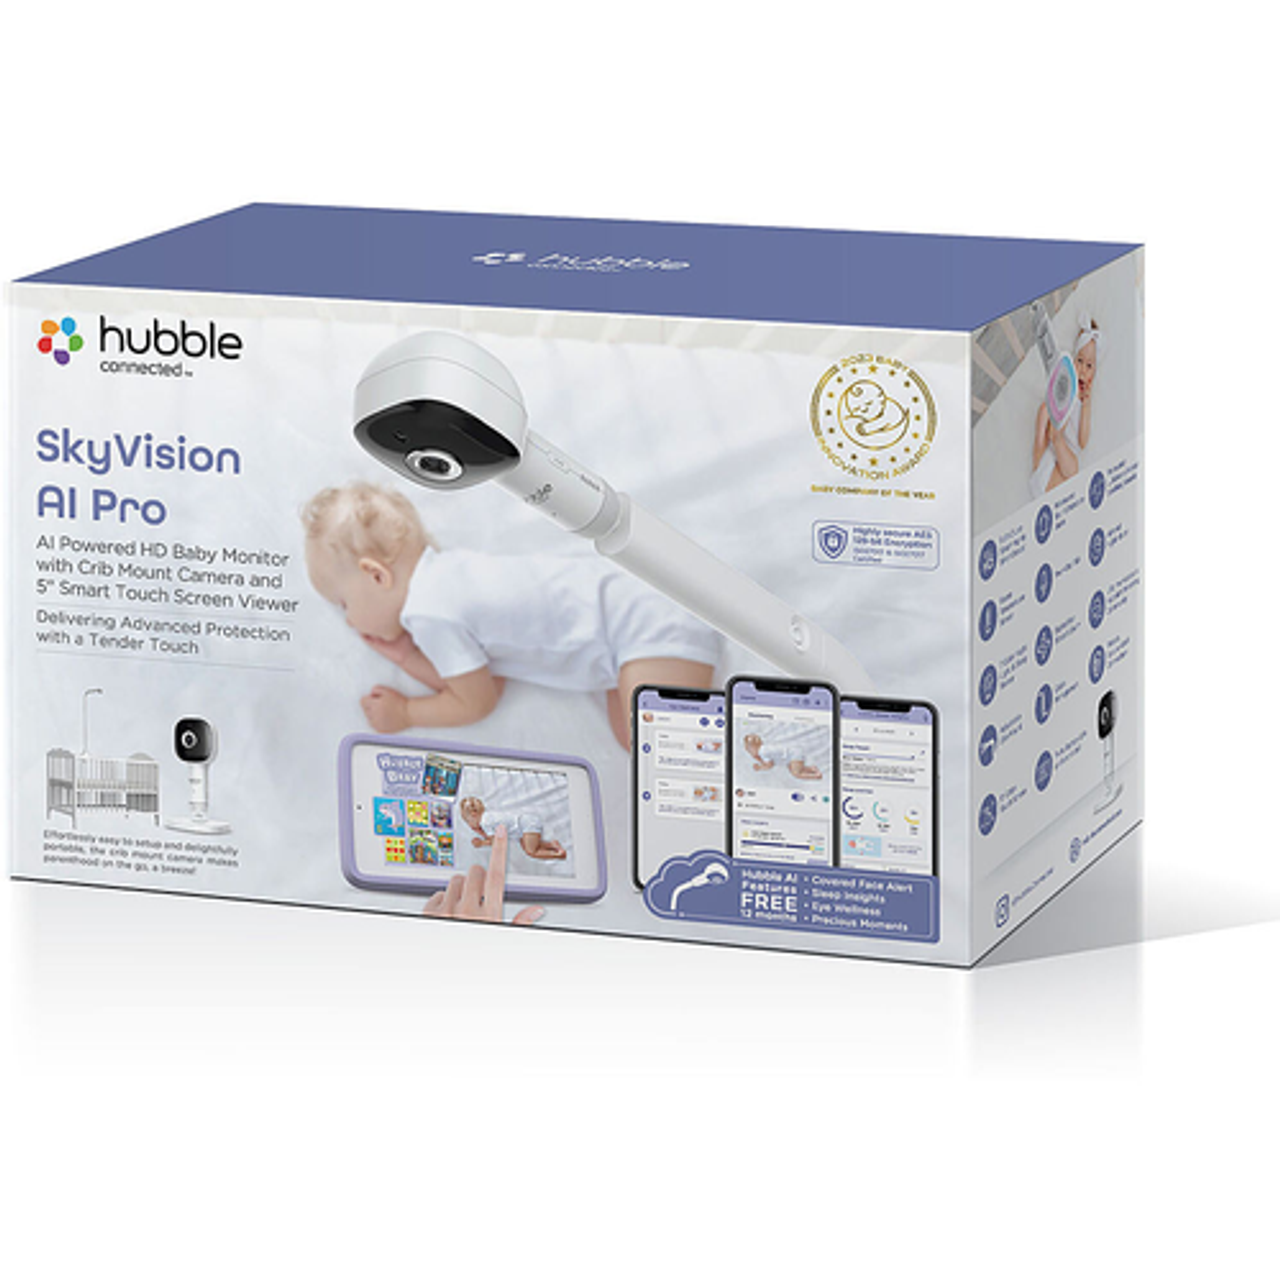 Hubble Connected - SkyVision Pro AI-Enhanced HD Smart Camera Baby Monitor, Travel-Friendly Parent Unit, Crib Mount, and Covered Face Alert - White